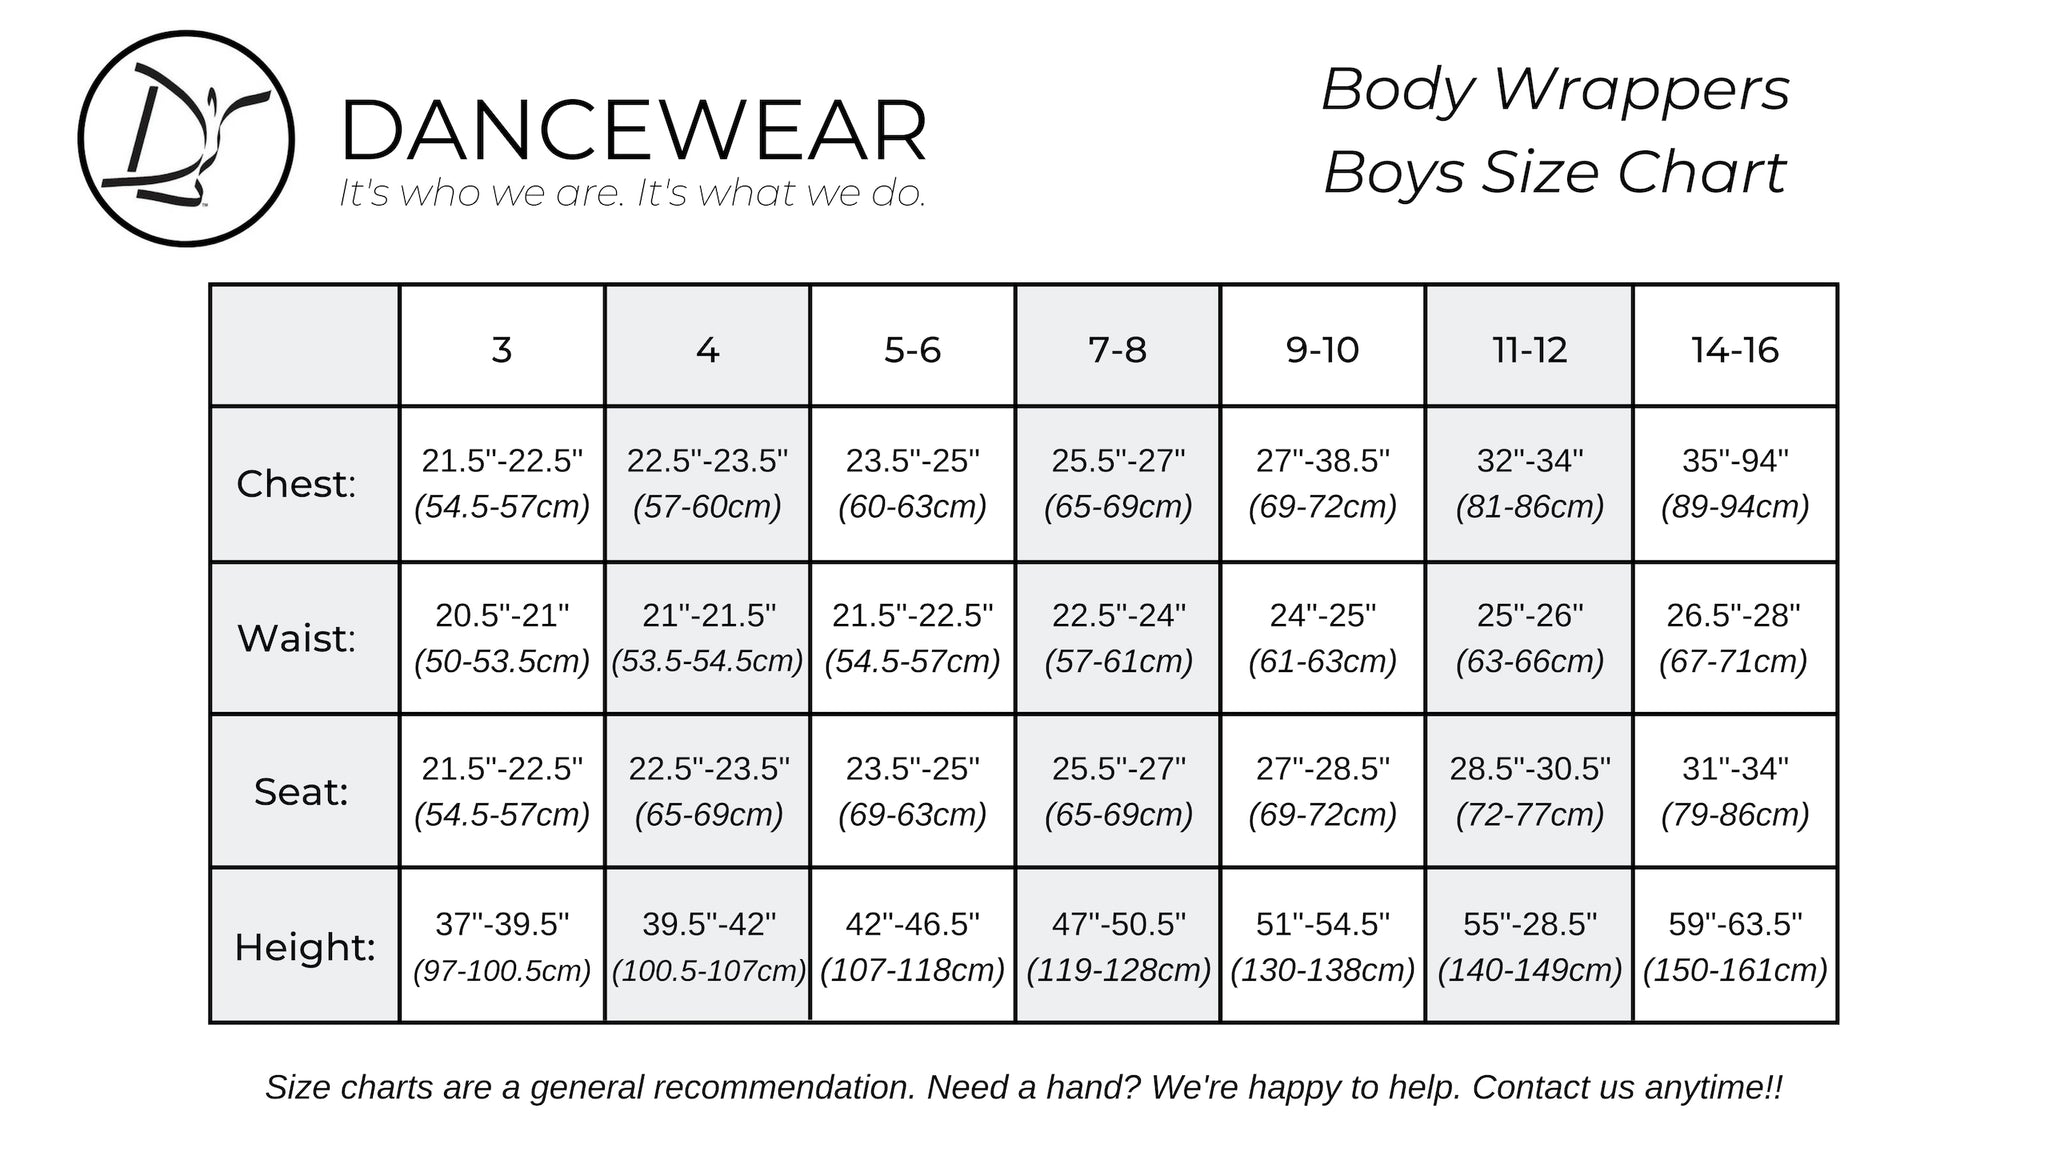 Body Wrappers Boys Size Chart